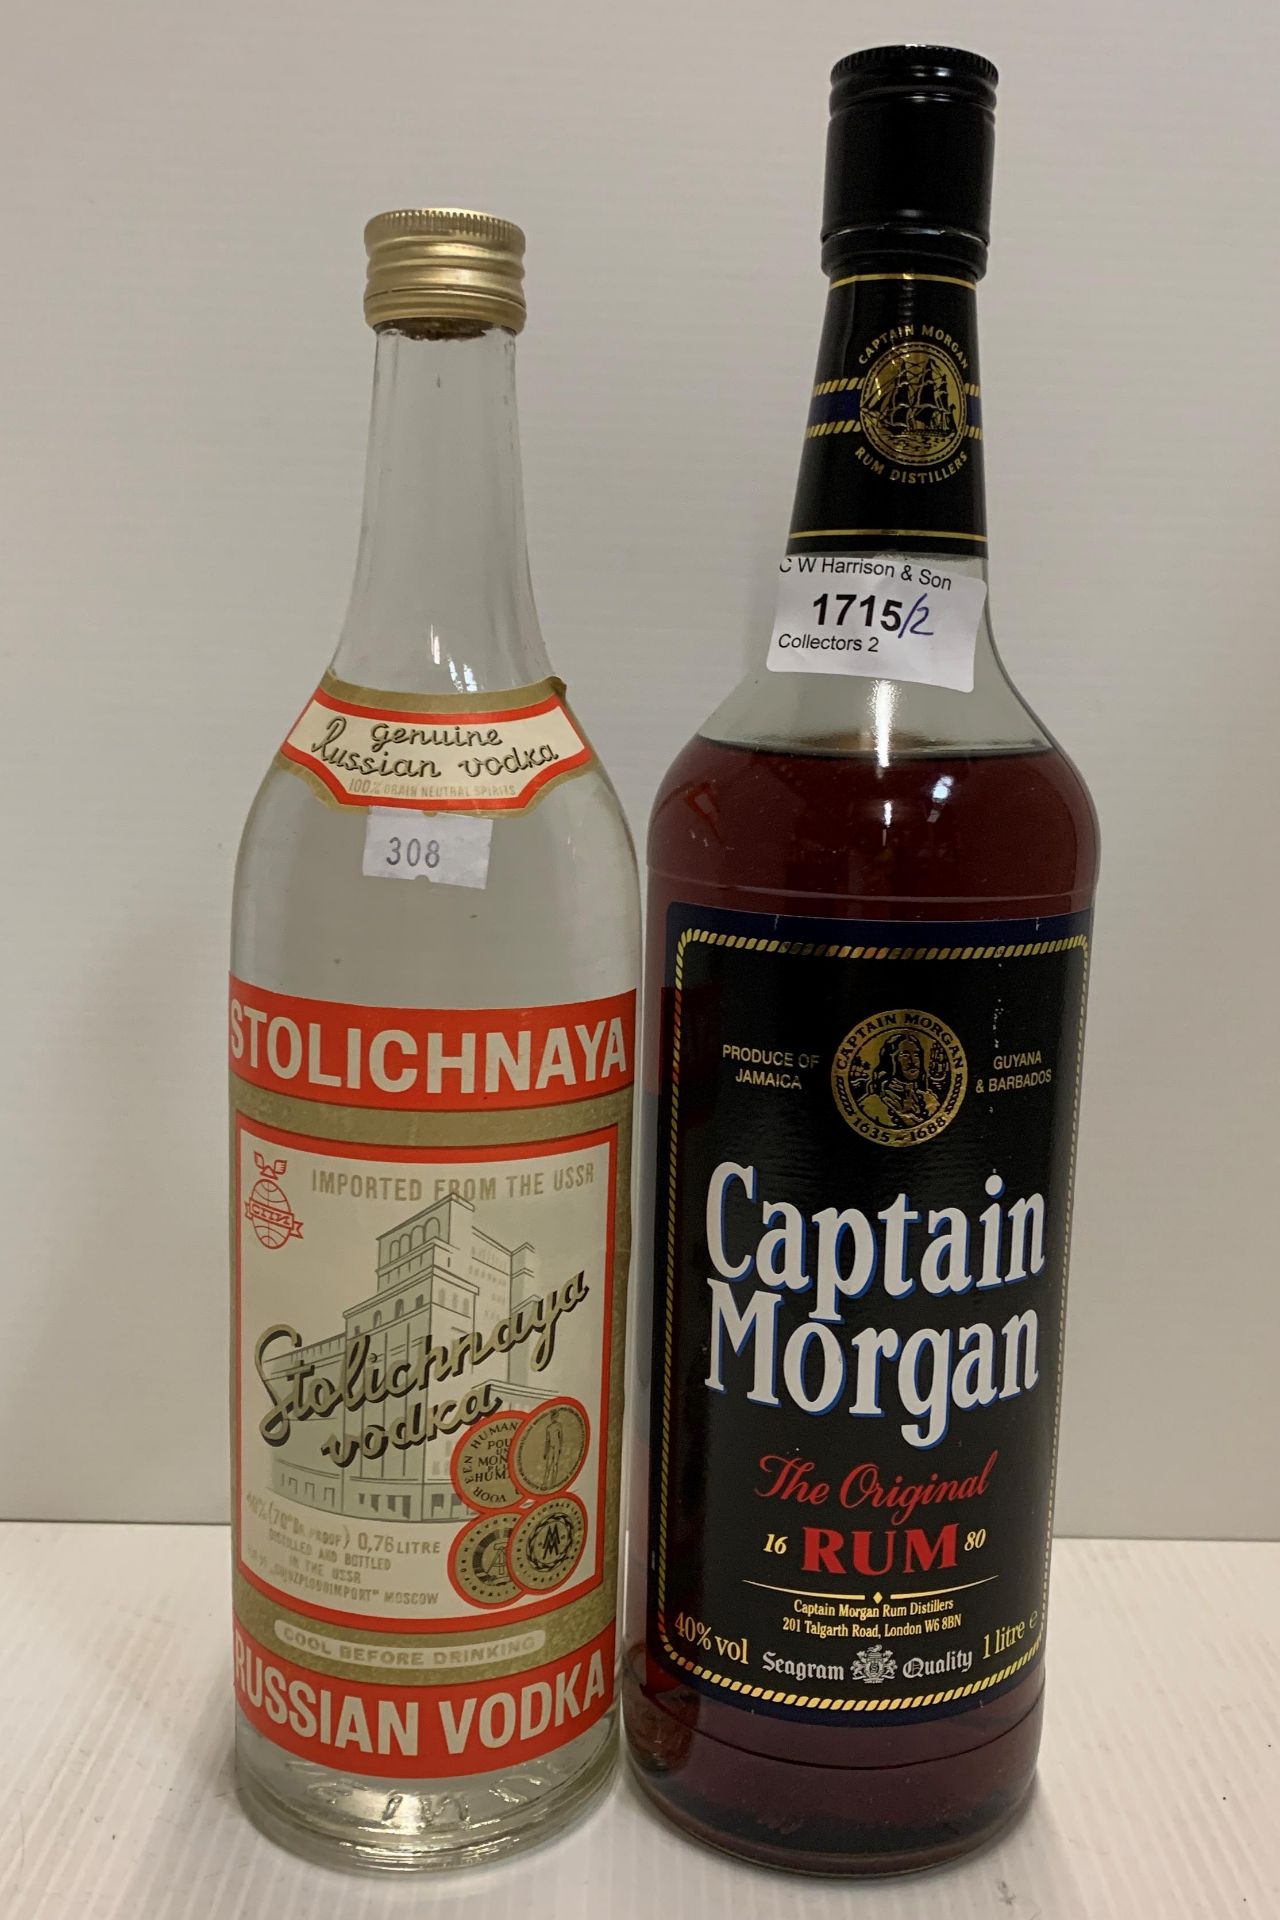 A one litre bottle of Captain Morgan Rum (40% volume) and a 0.